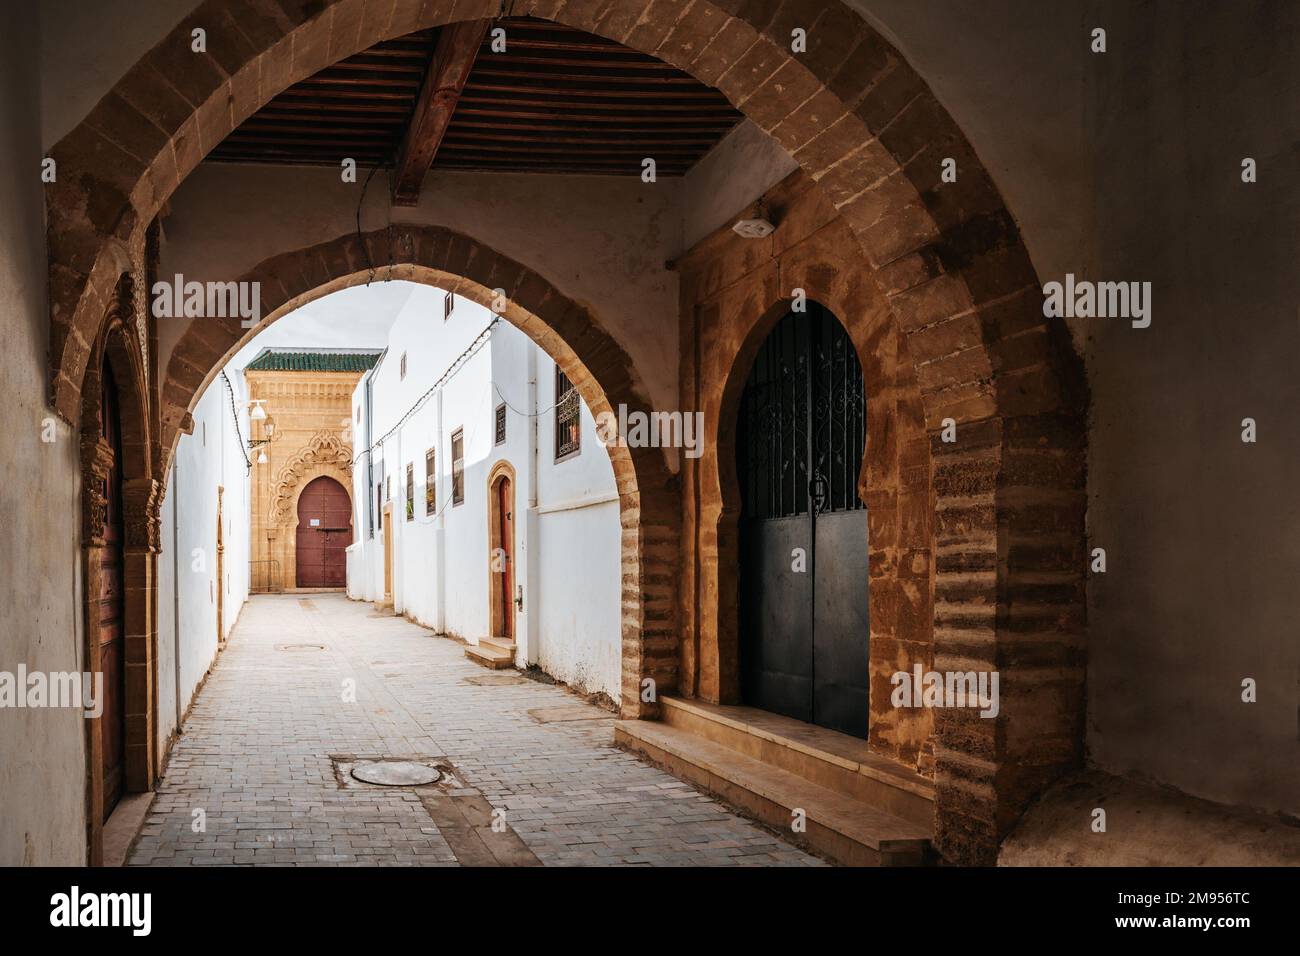 Salé Medina, Morocco. Picturesque alley with an archway Stock Photo